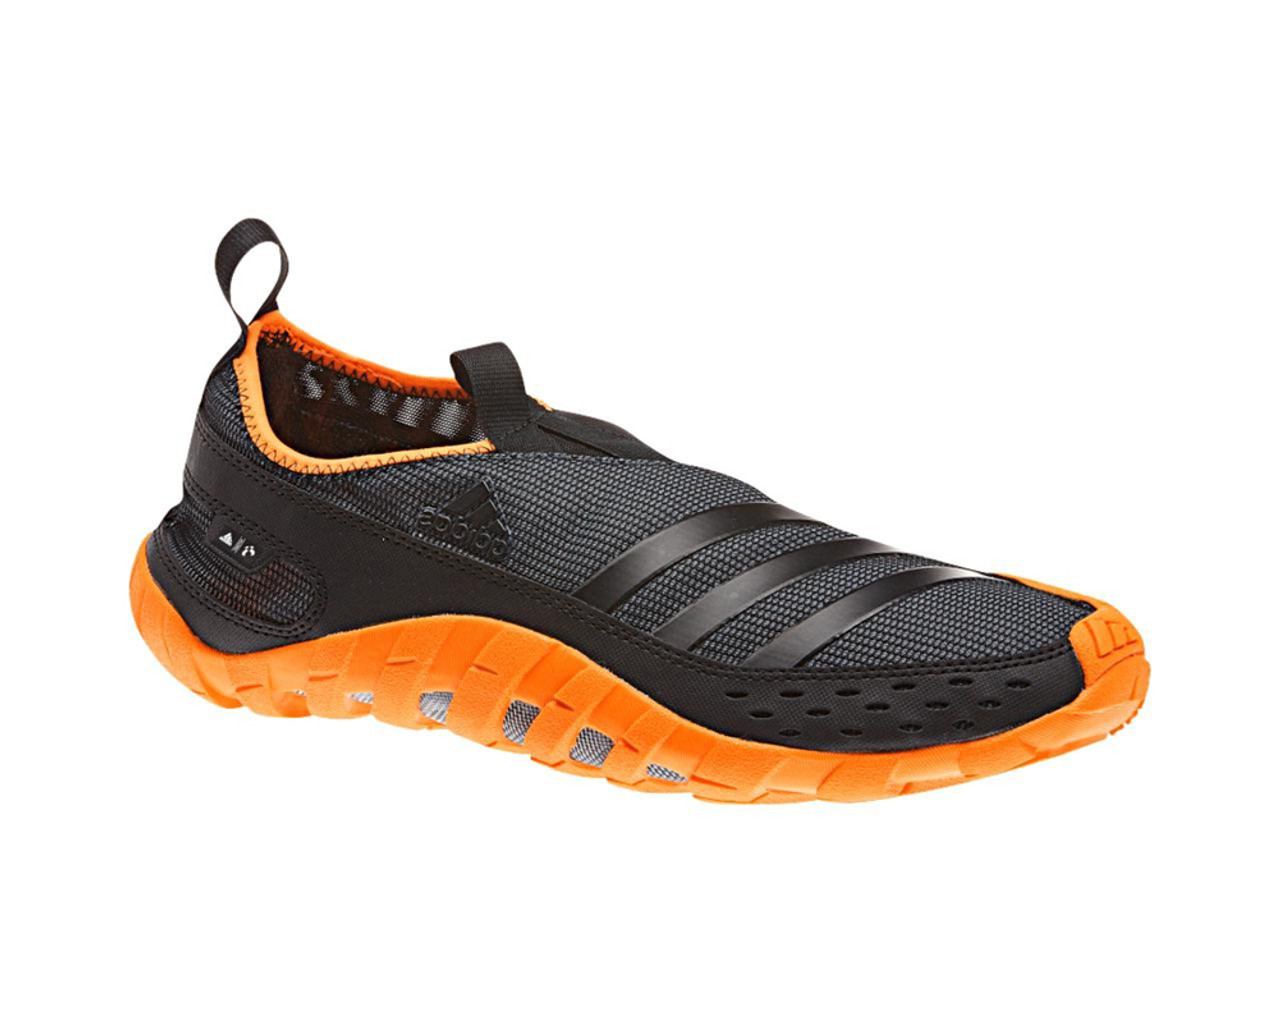 Adidas Men's Jawpaw II Water Shoes - Grey | Discount Adidas Men's Athletic  Shoes & More  